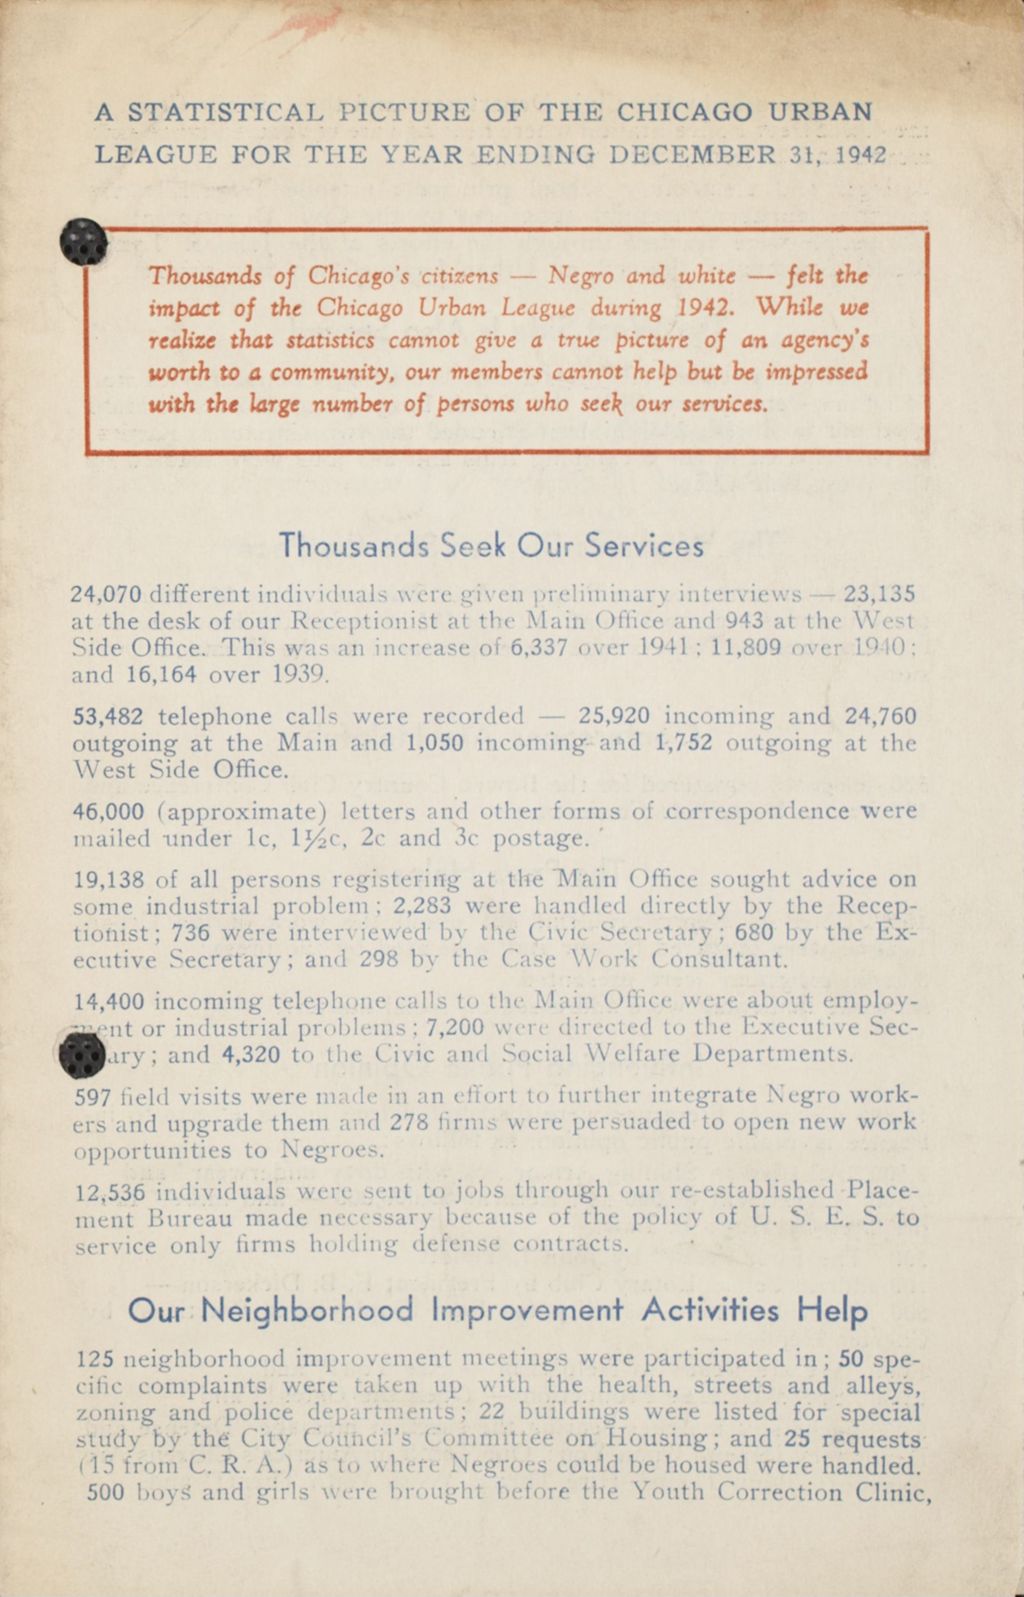 Miniature of Statistical Picture of the Chicago Urban League, 1942 (Folder I-28)